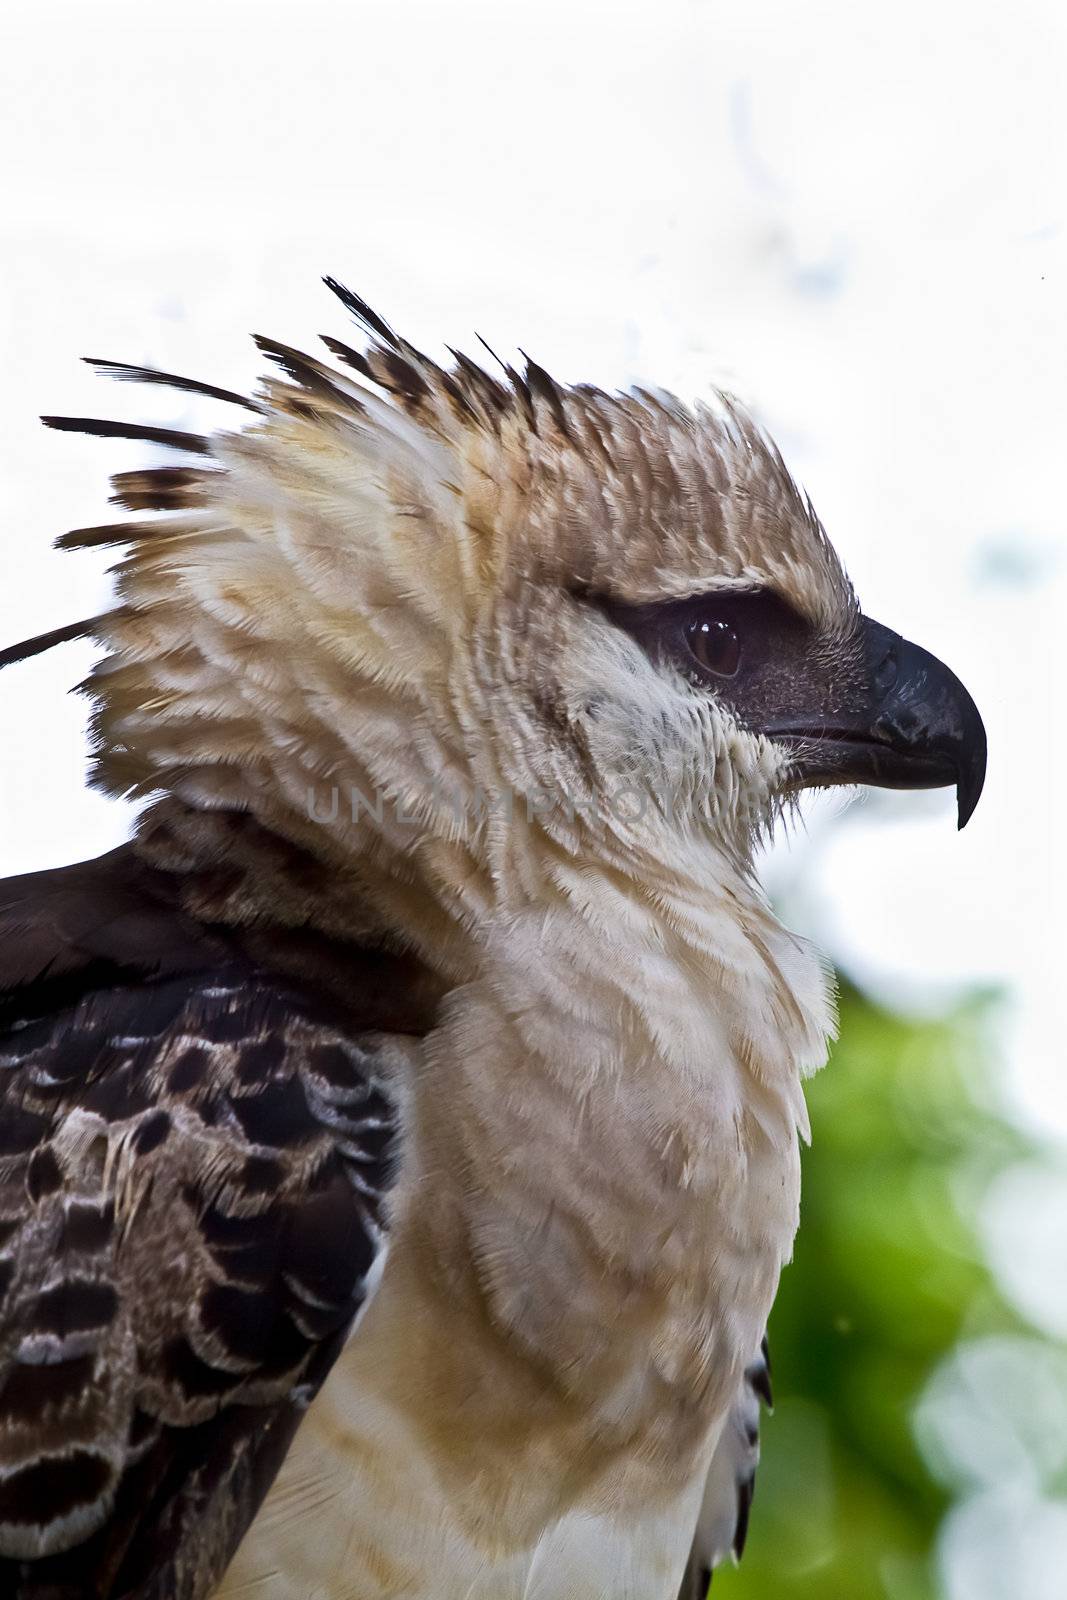 Head shot of the massive crested Eagle while it rests on a nearby branch in Peru.